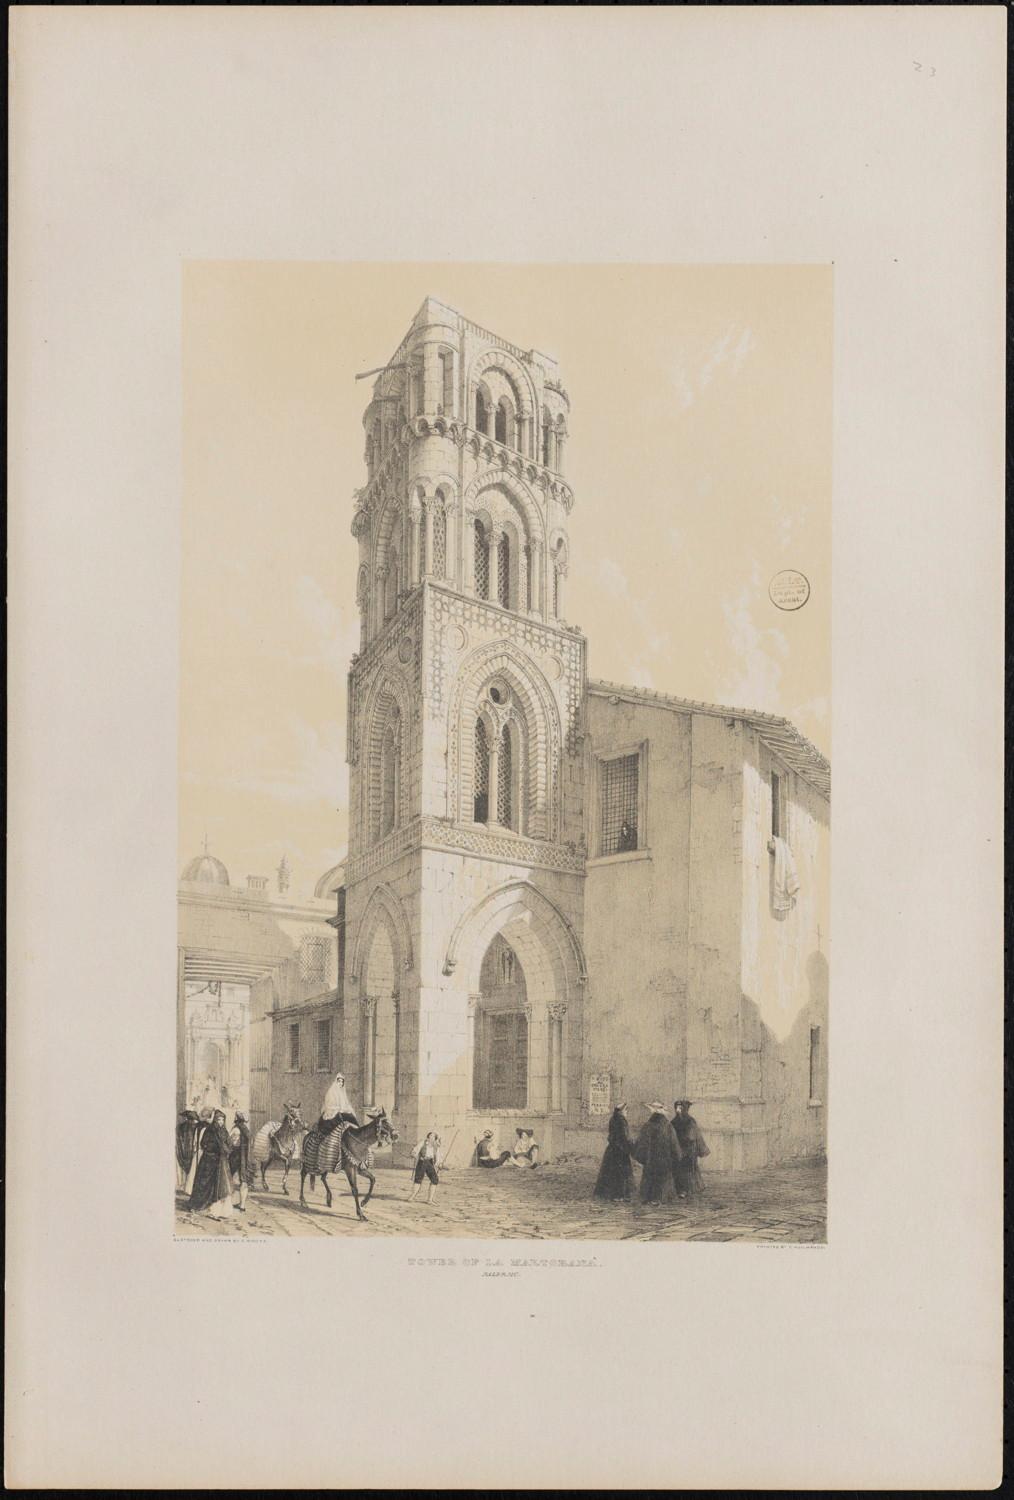 Lithograph of the church tower